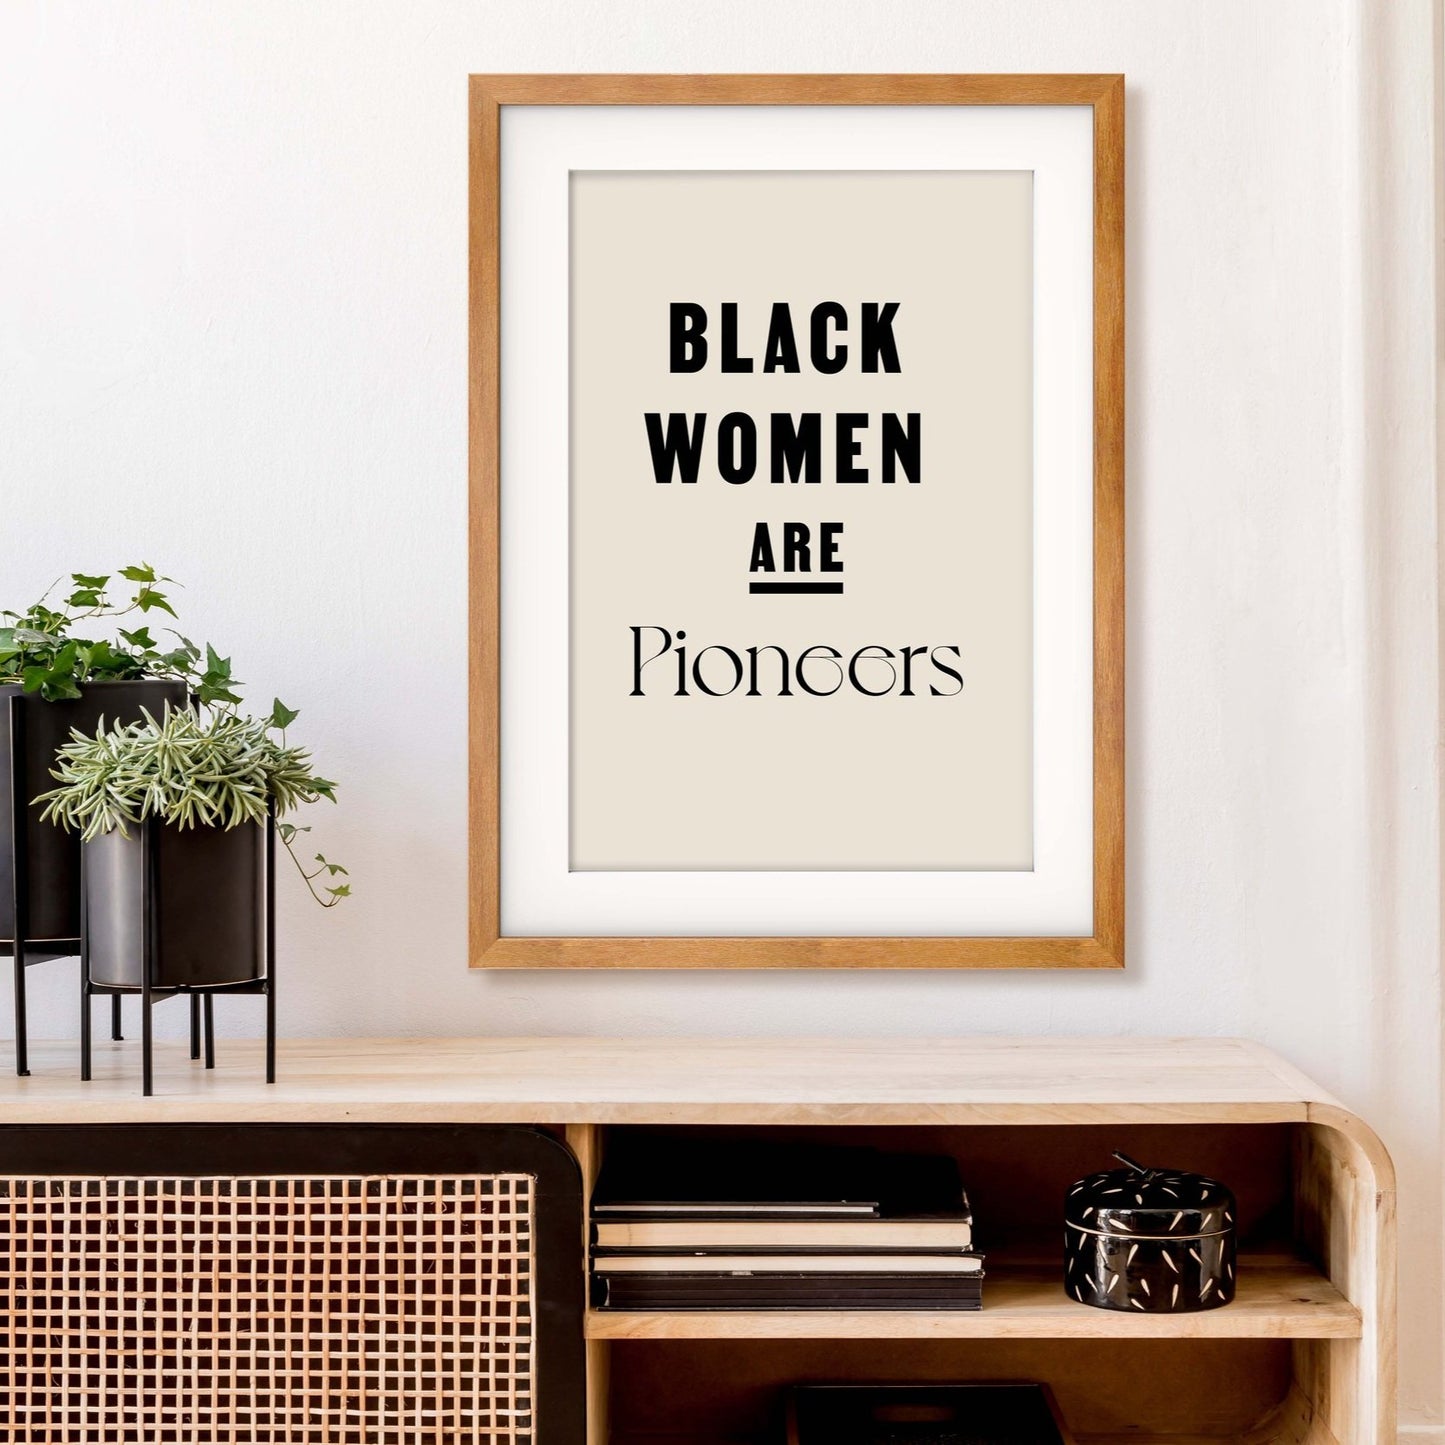 Pioneers 11x14” typography inspirational quote art print from Goods Made By Digitrillnana, Ashley Fletcher. Black Woman art. Perfect for home decor, wall art, art prints, and more! Black Woman Owned.